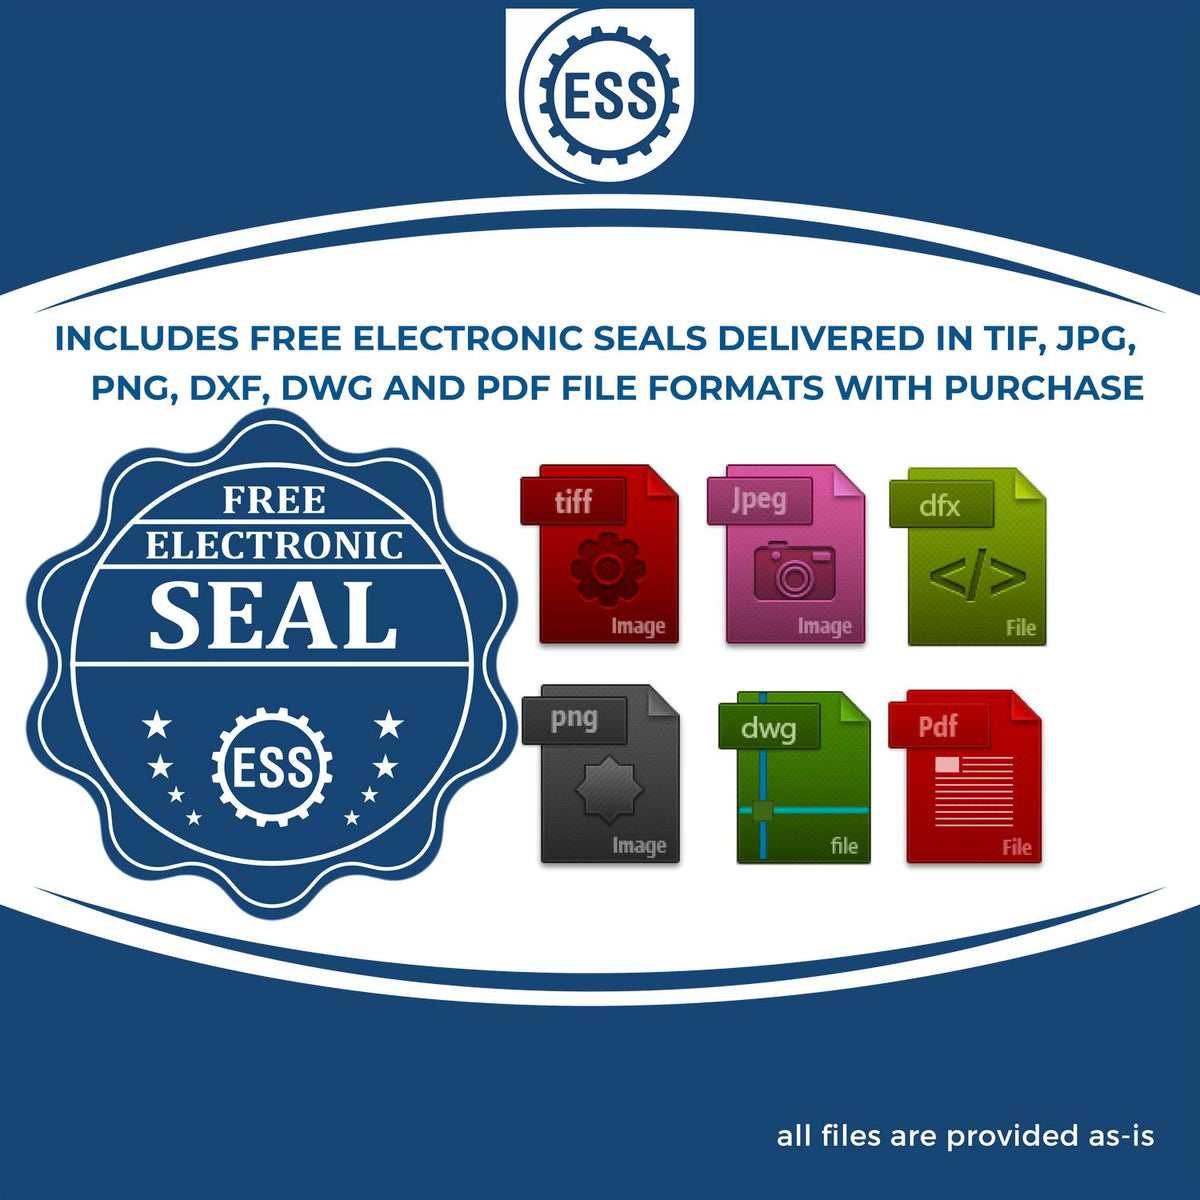 An infographic for the free electronic seal for the Heavy Duty Cast Iron Virginia Architect Embosser illustrating the different file type icons such as DXF, DWG, TIF, JPG and PNG.